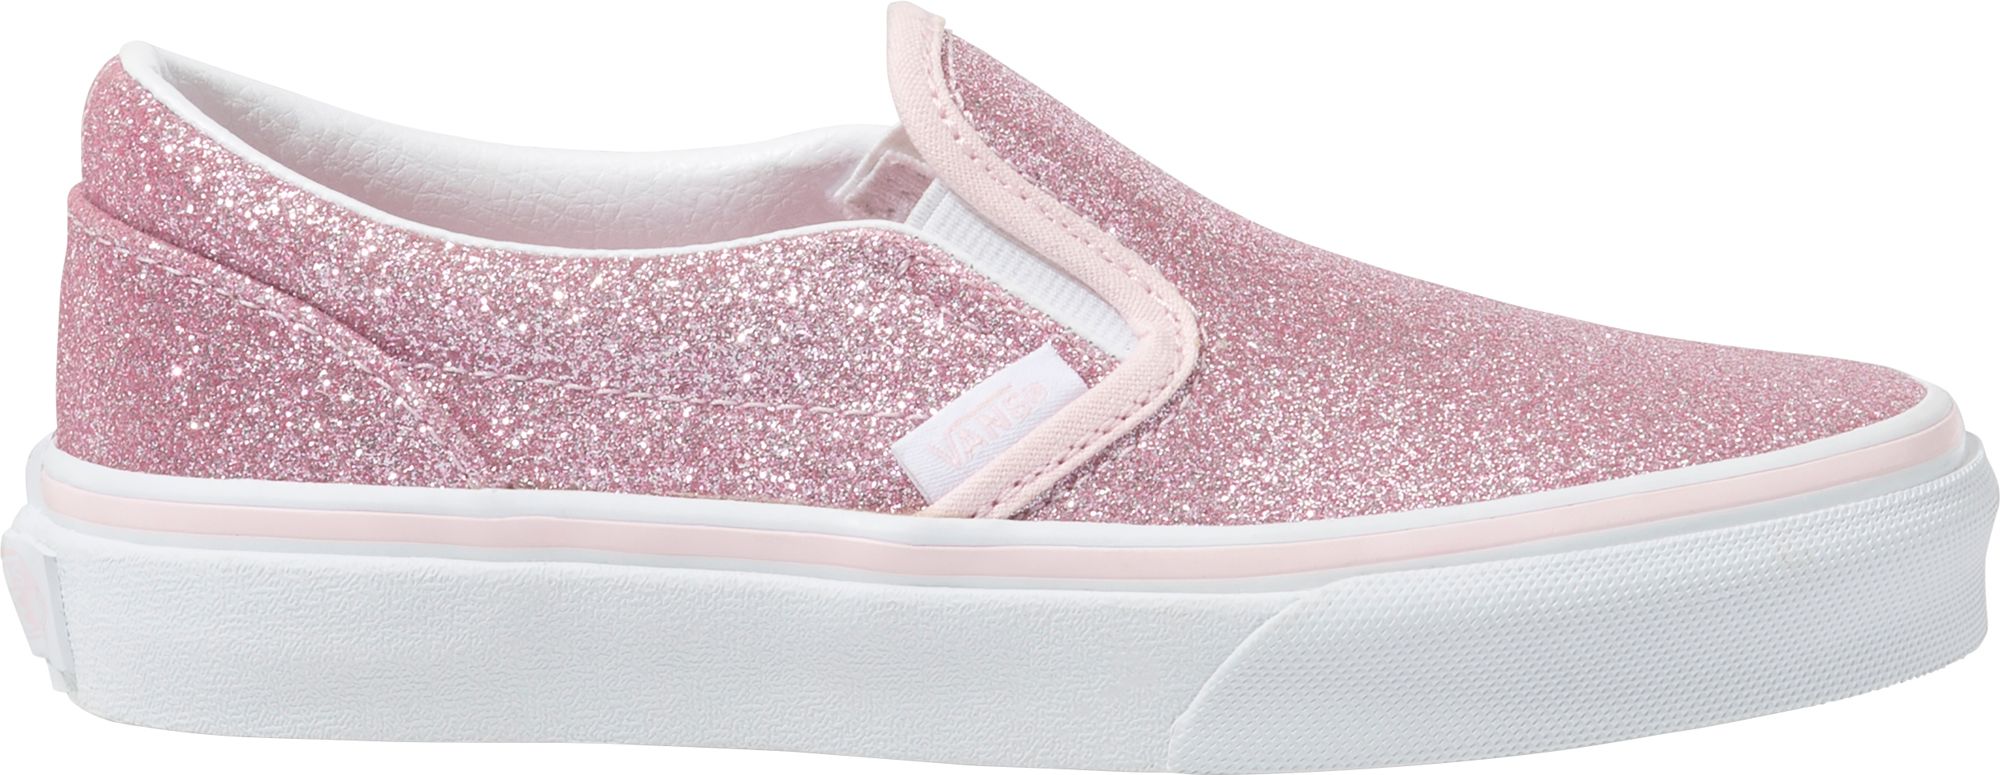 vans shoes with glitter